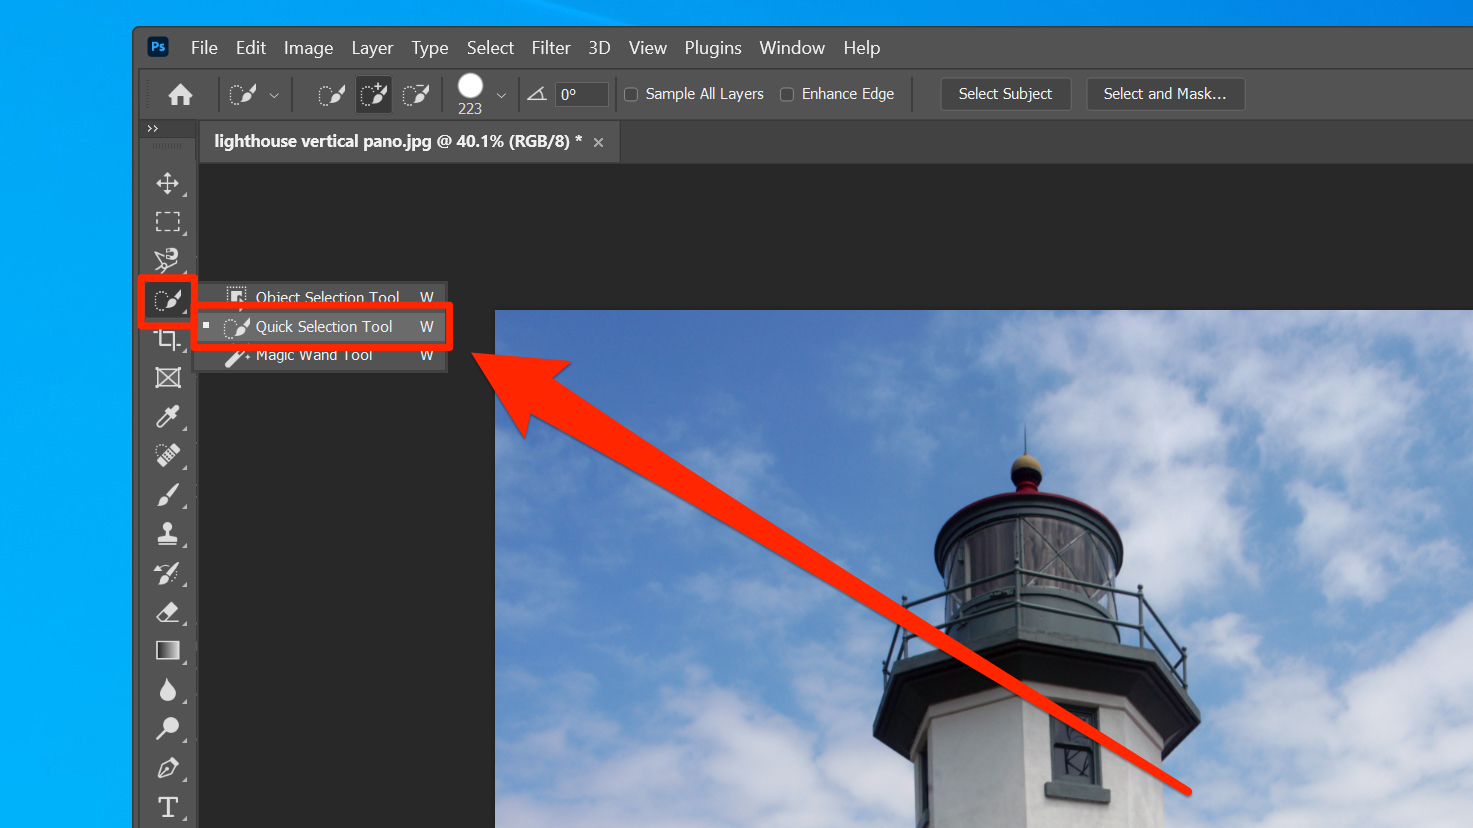 adobe photoshop 7.0 quick selection tool download